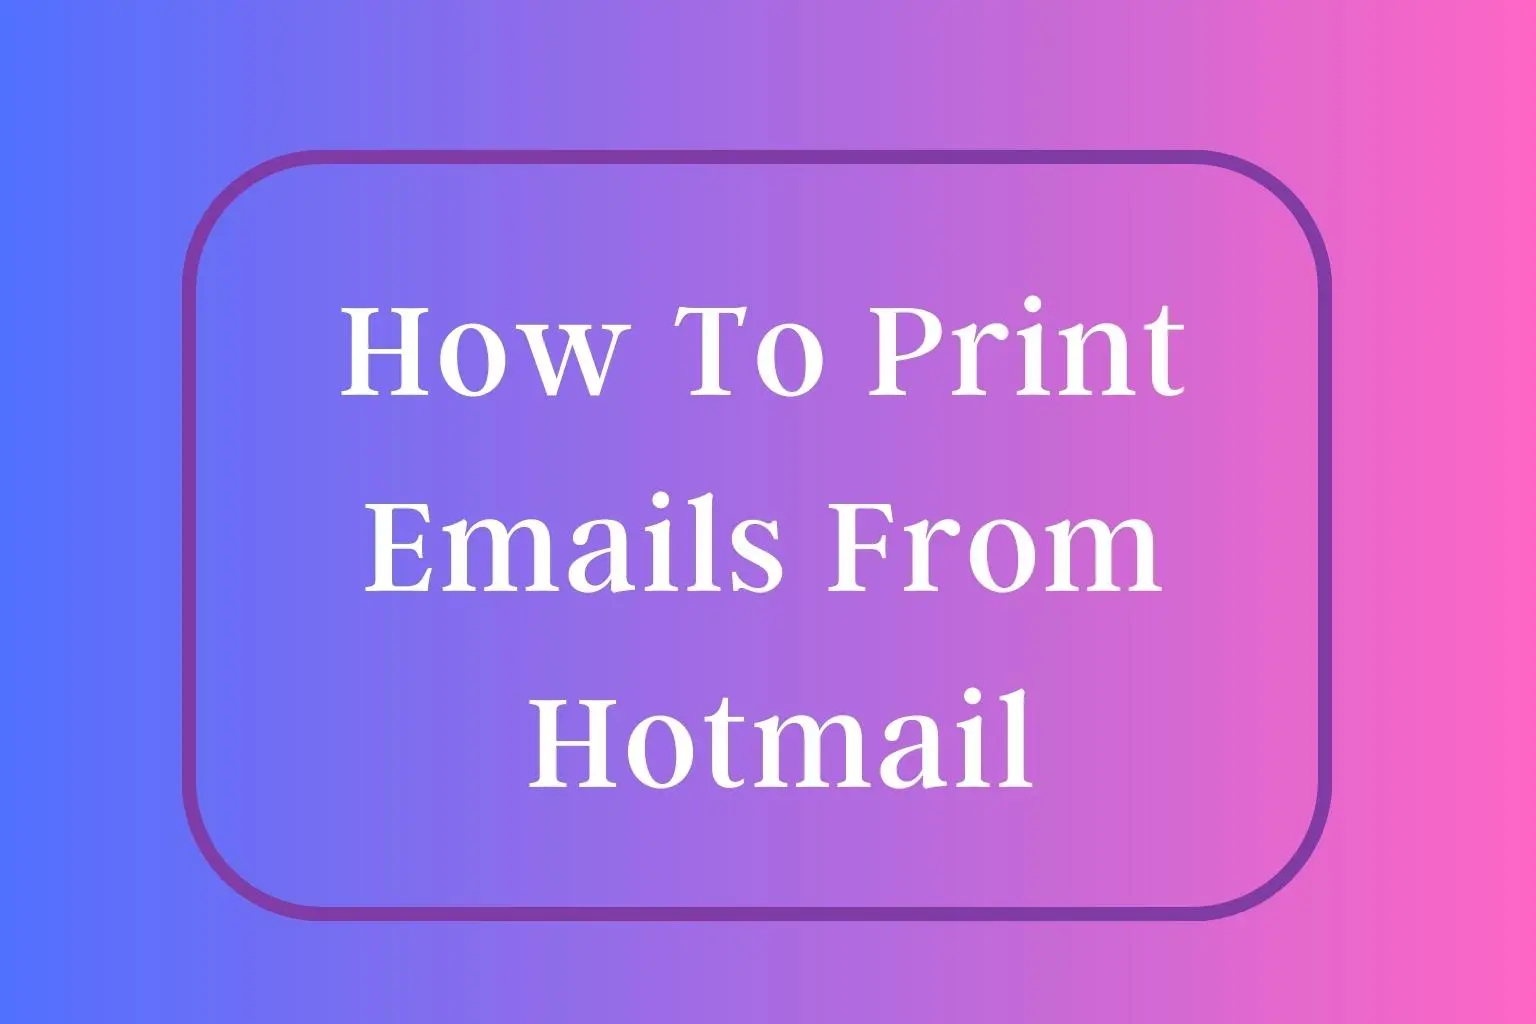 How To Print Emails From Hotmail